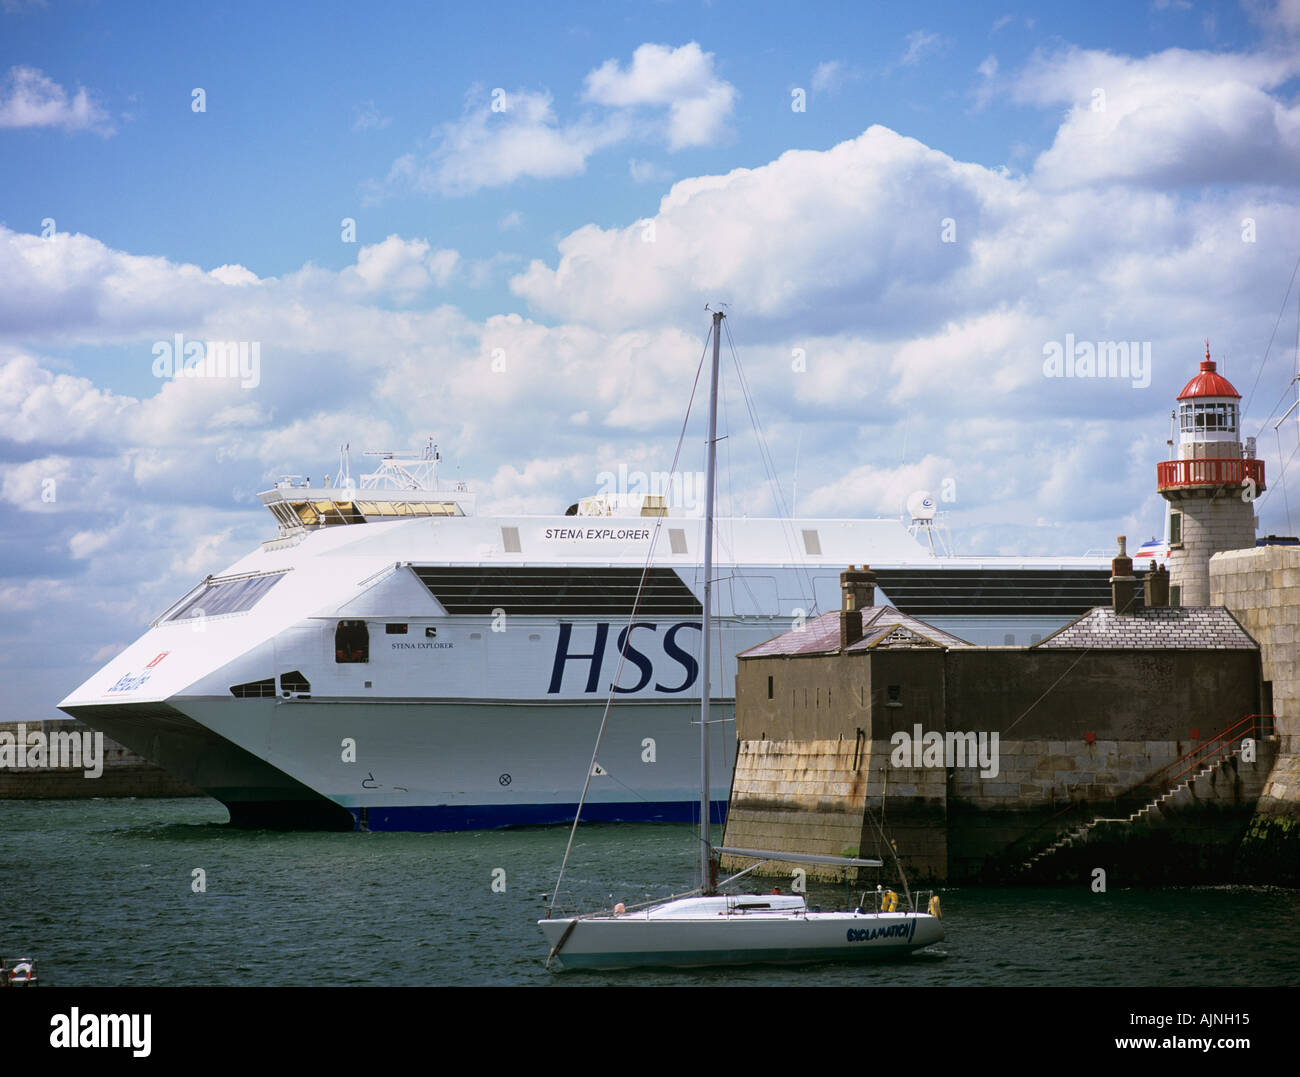 SEA CAT ENTERING HARBOUR HSS Stenna Explorer fast ferry from Holyhead to Dun Laoghaire Dublin Eire Europe Stock Photo